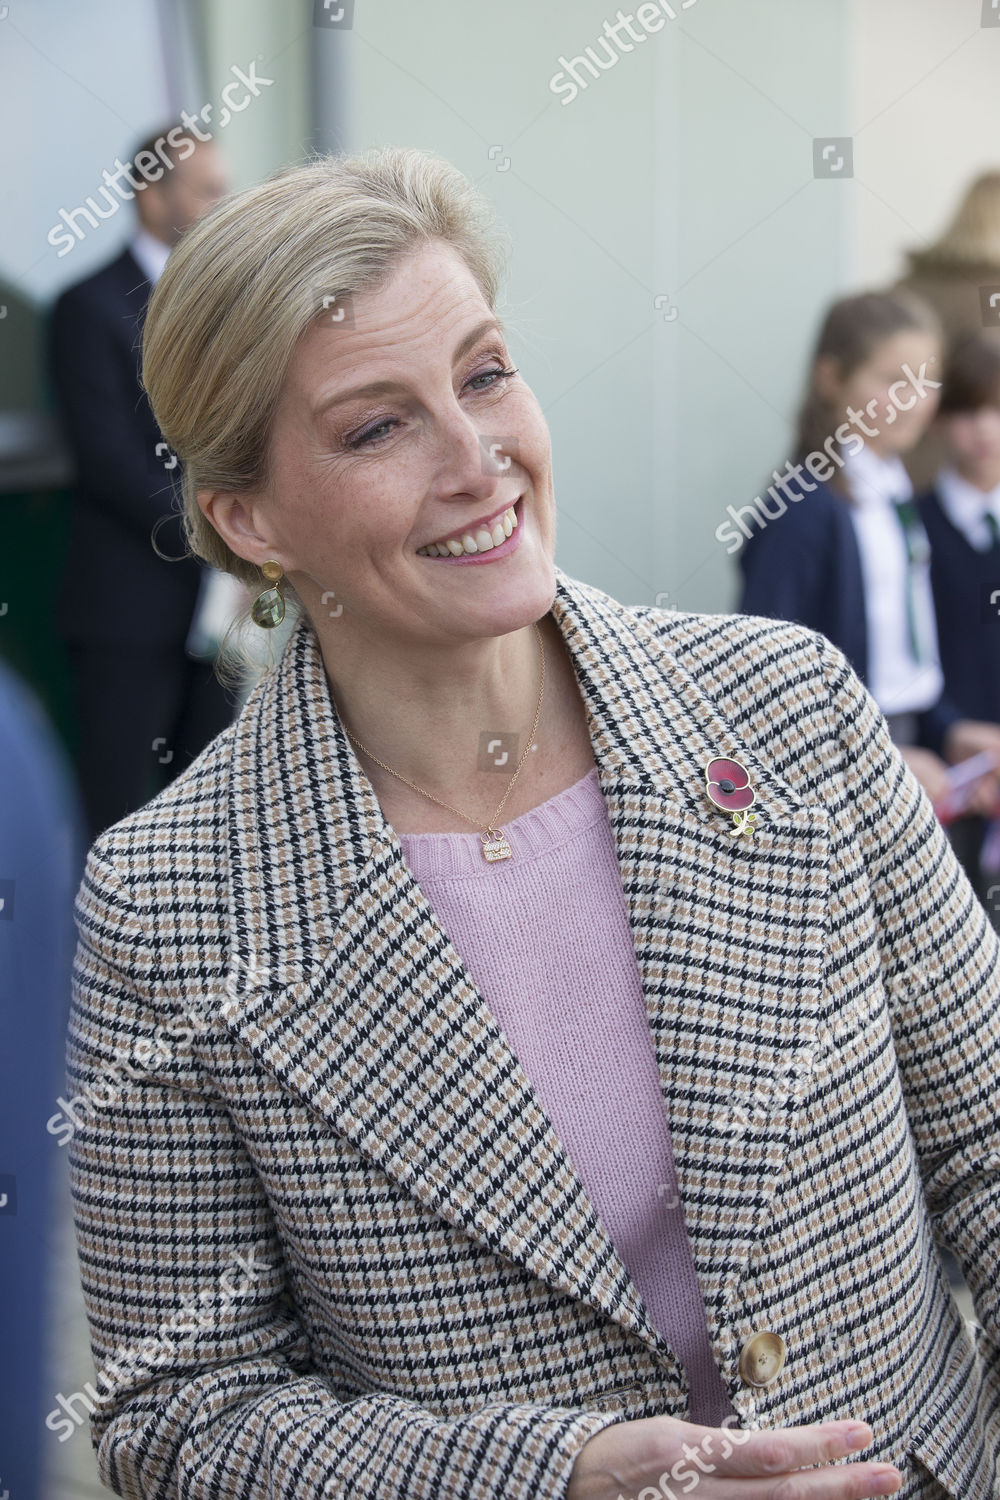 sophie-countess-of-wessex-opens-countess-gytha-primary-school-queen-camel-somerset-uk-shutterstock-editorial-9185872aj.jpg